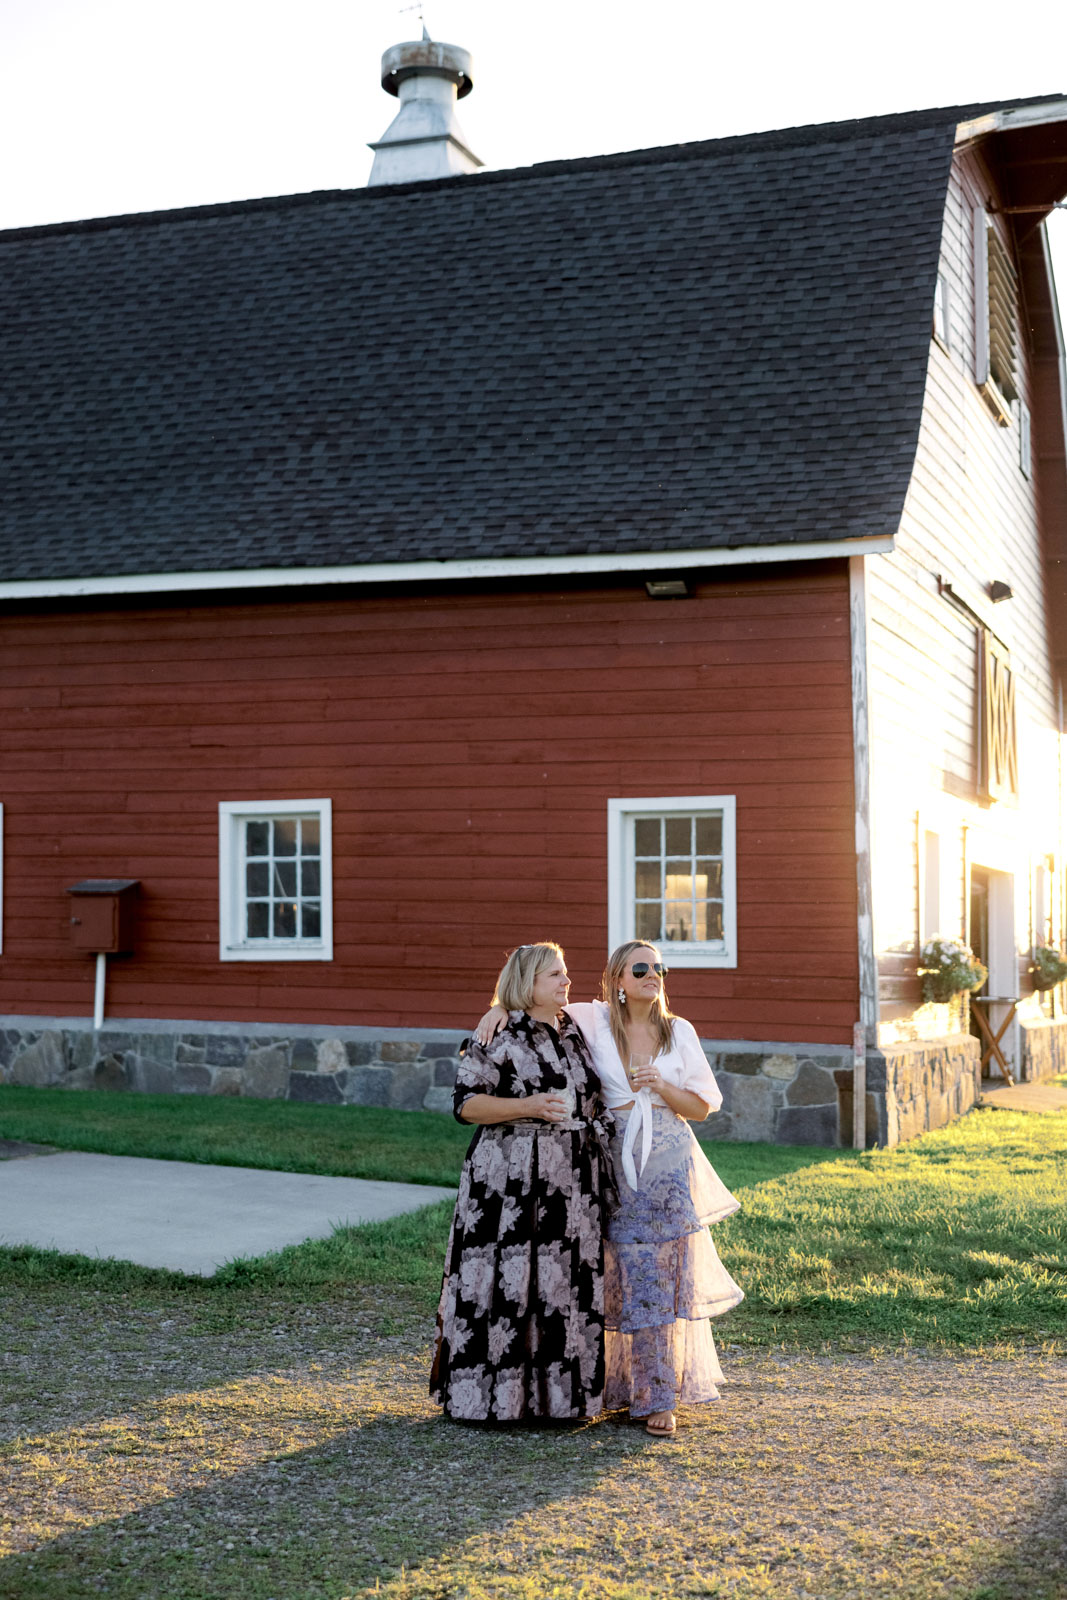 The bride's arm is on a lady's shoulder in front of a red barn house. Editorial rehearsal dinner image by Jenny Fu Studio.